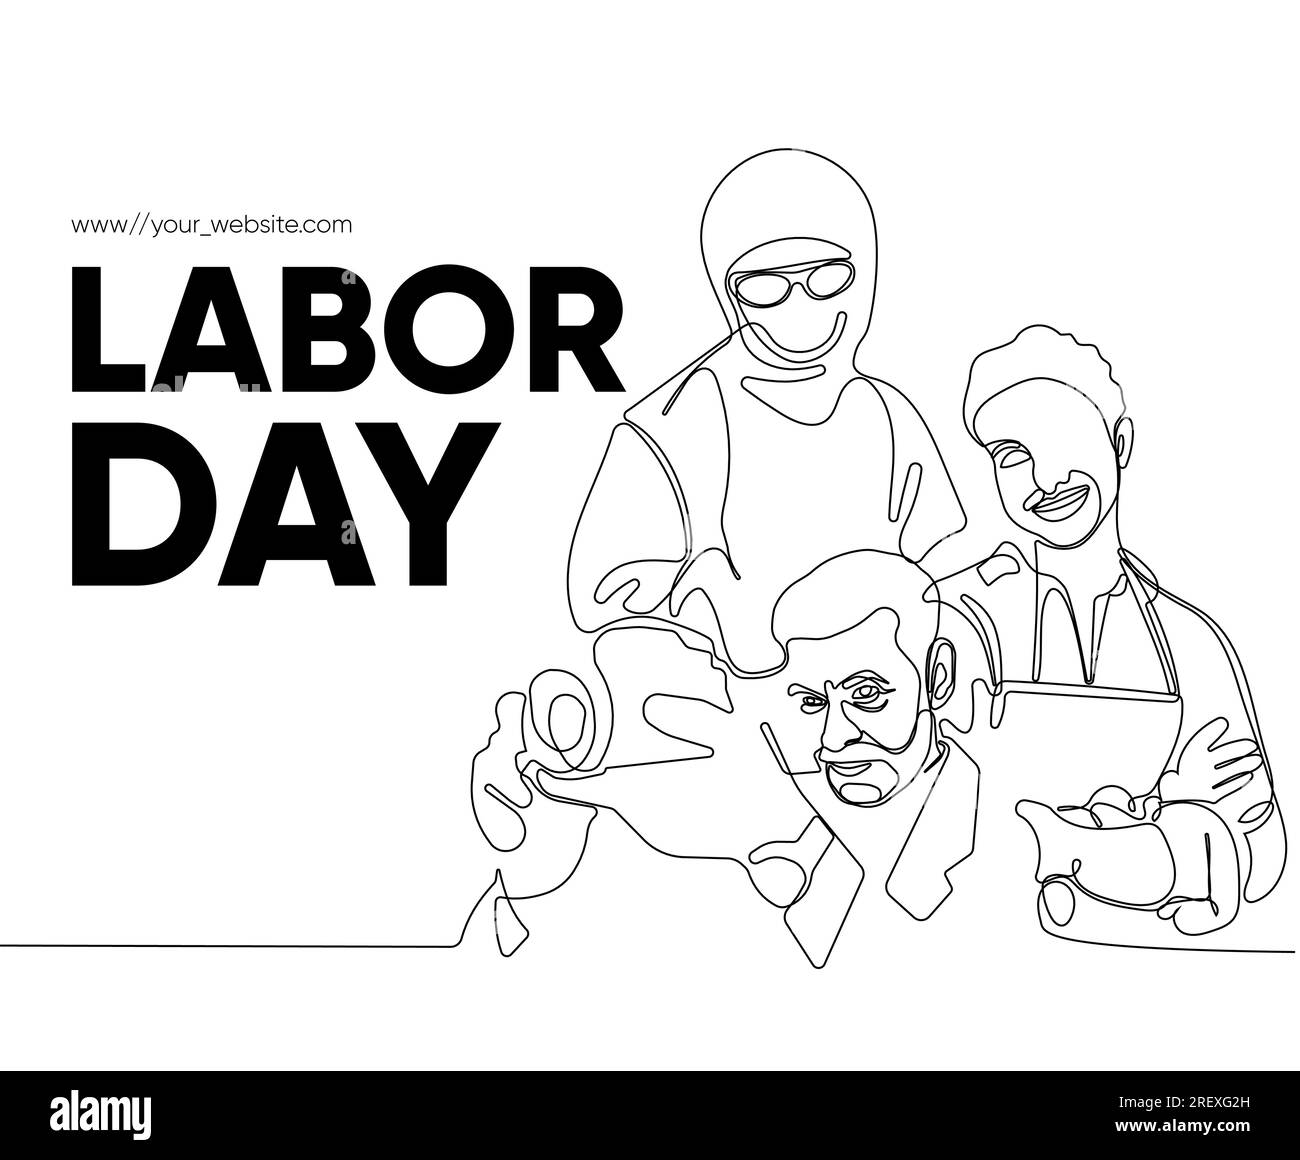 Labour Day Canada Colouring Pages - Get Coloring Pages-saigonsouth.com.vn